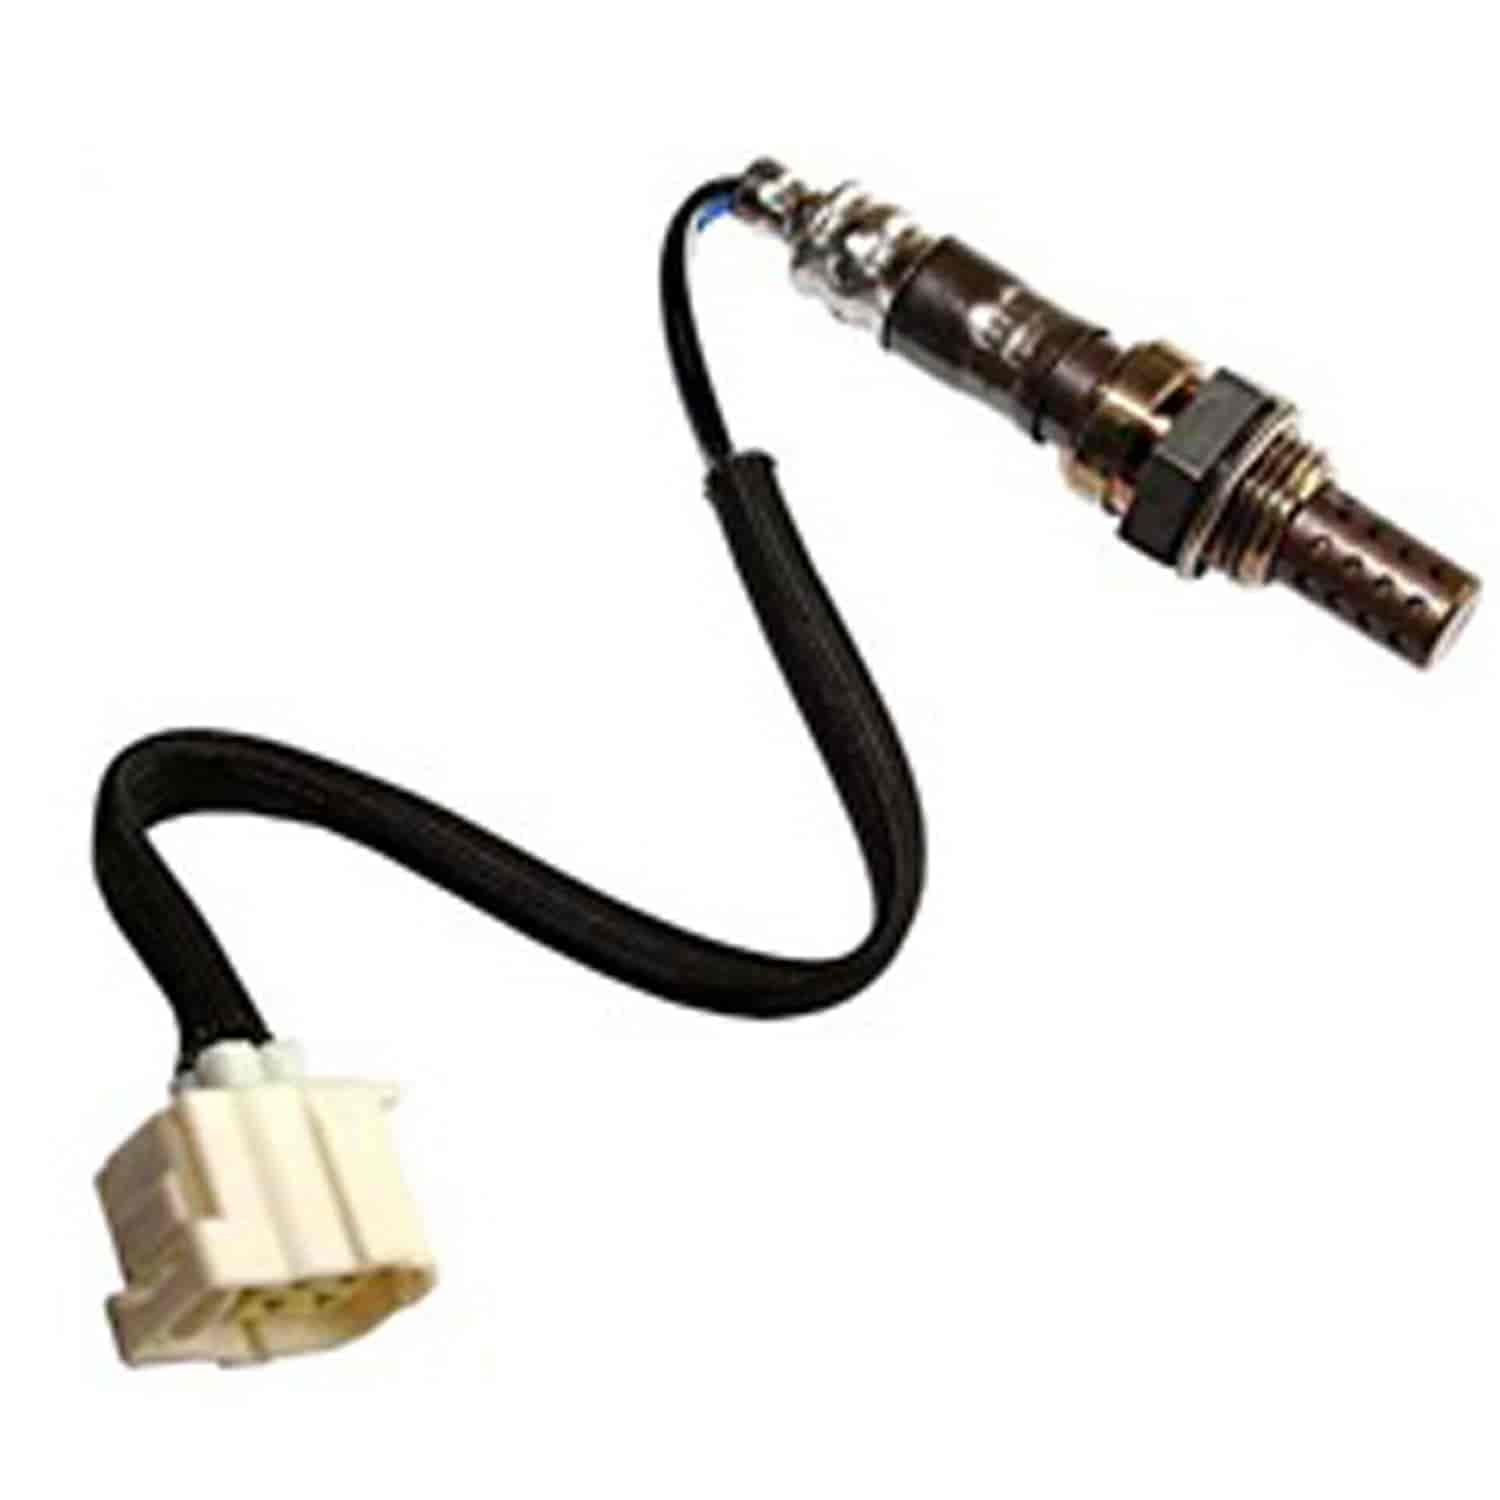 Replacement oxygen sensor from Omix-ADA installs after catalytic converter on 02-04 Jeep Libertys and Wrangler